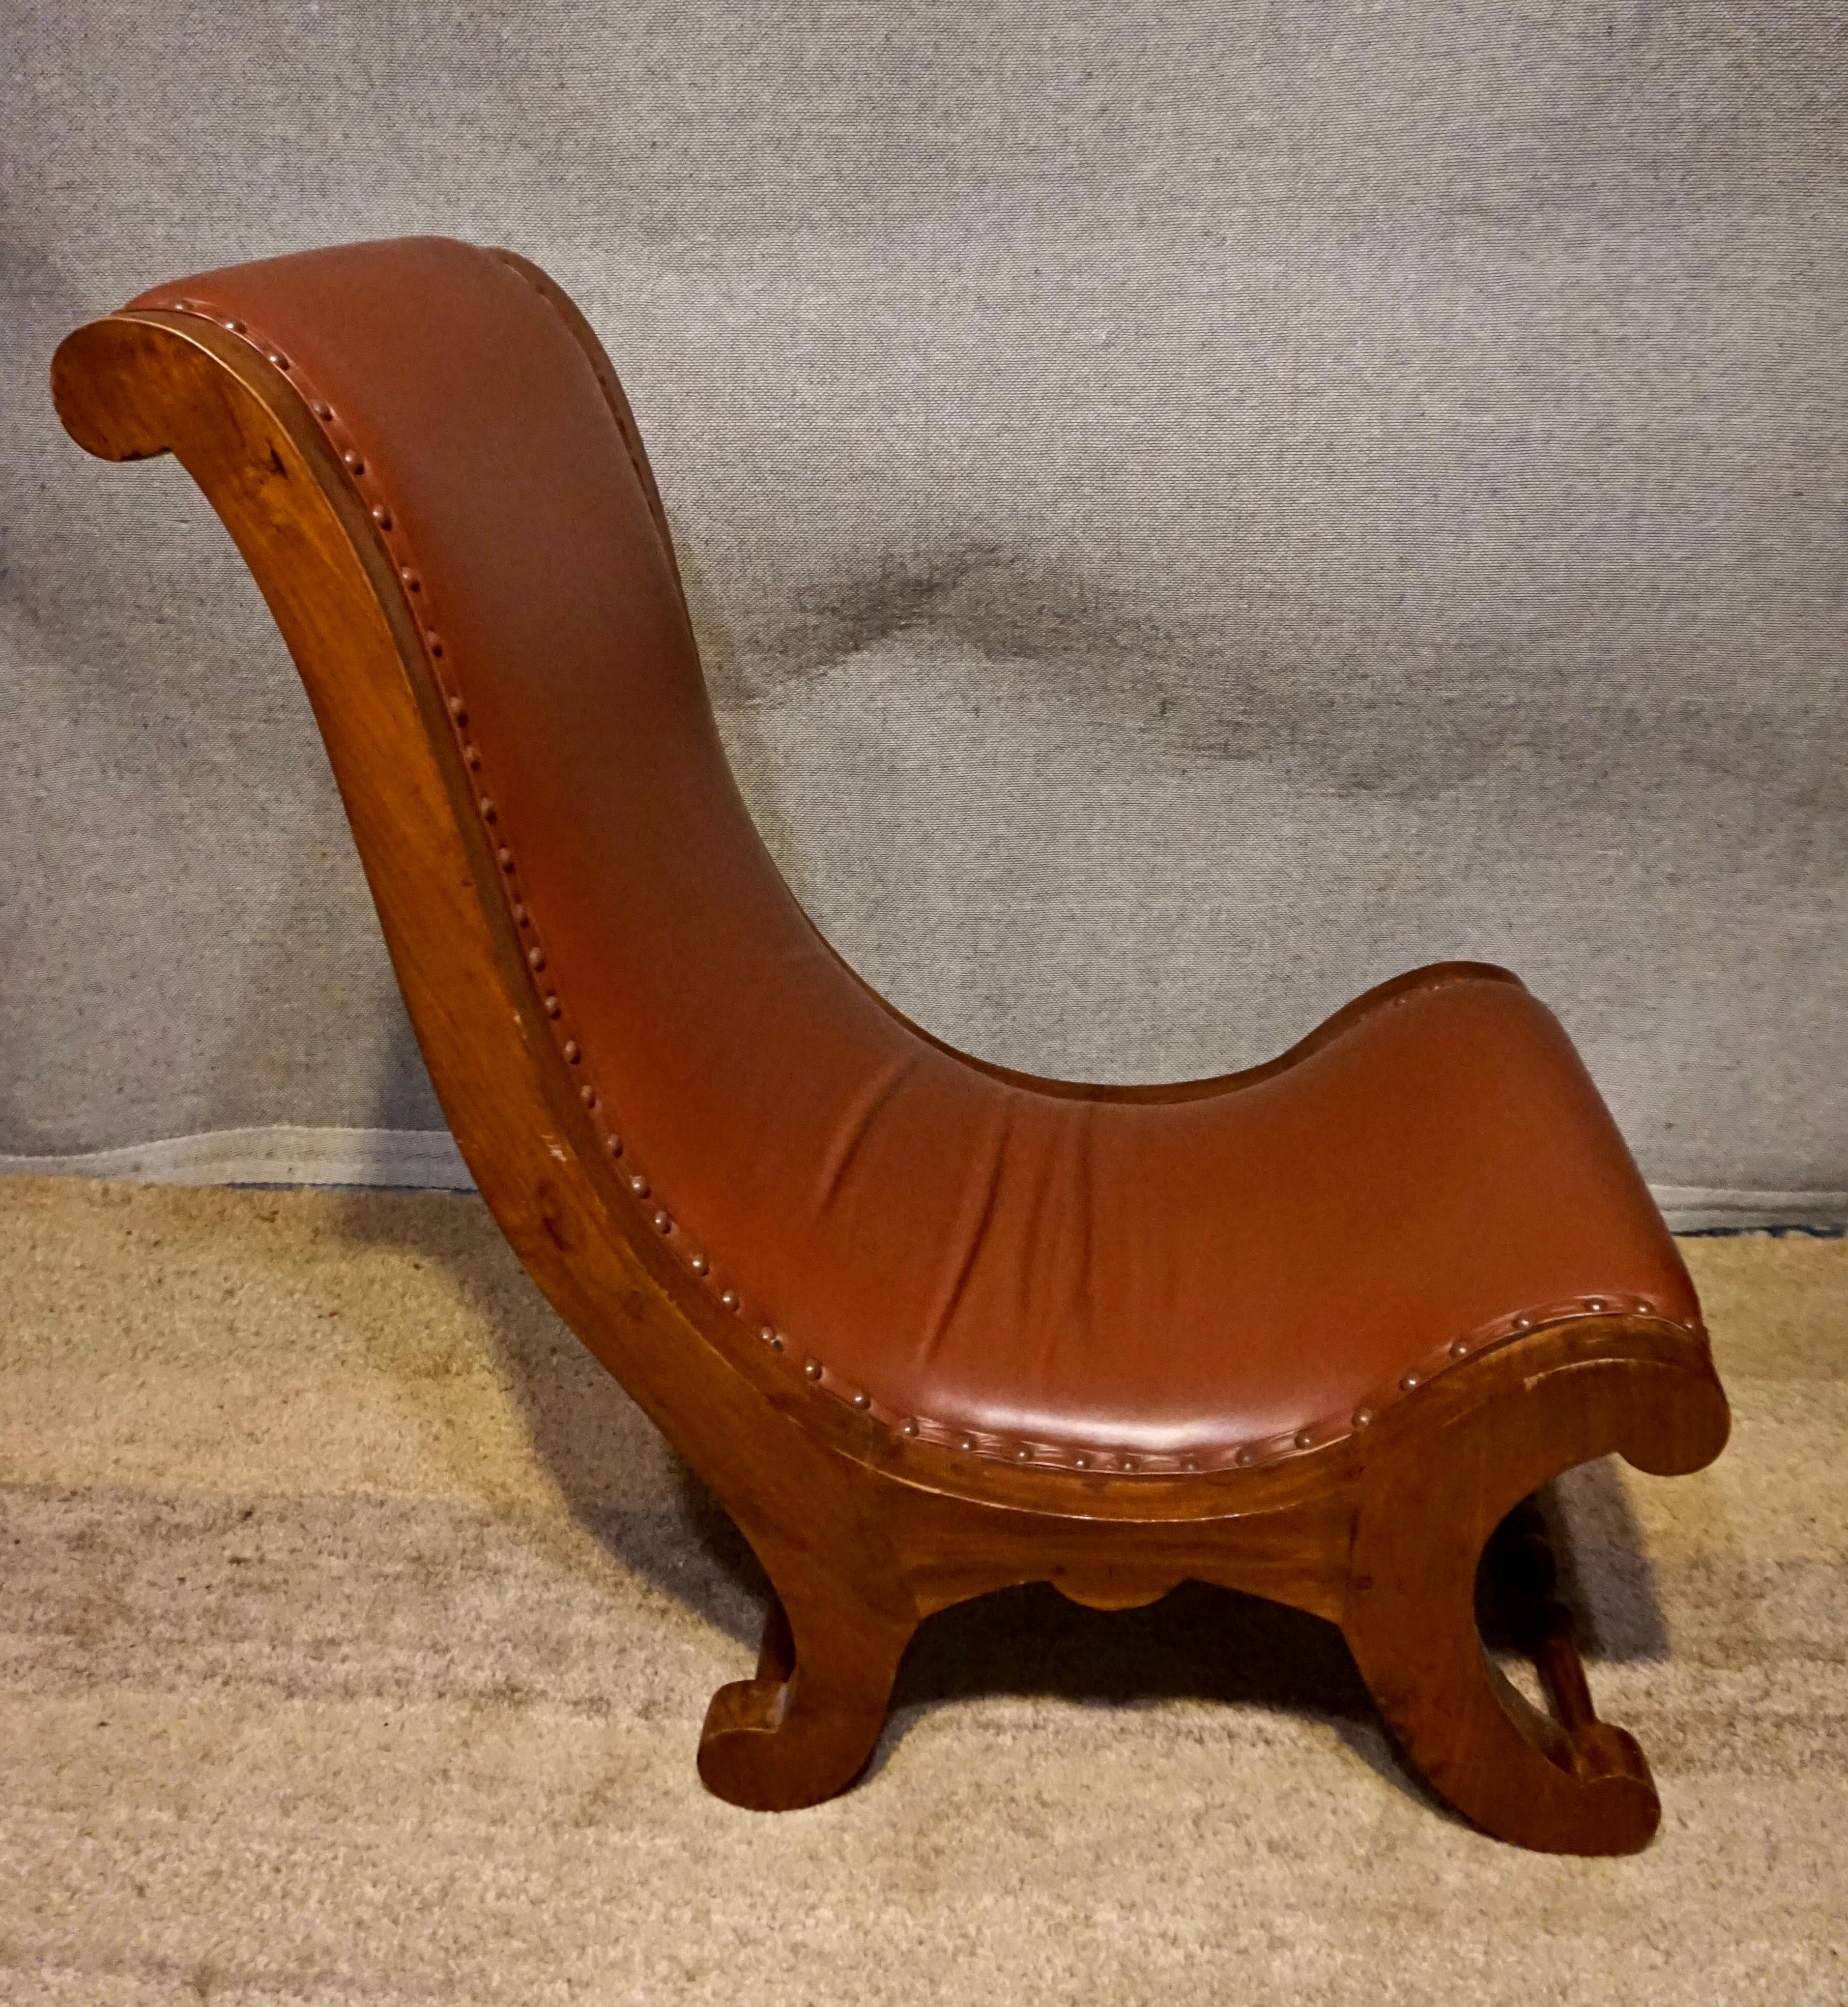 Circa 1920's

Hand carved Victorian Slipper chair constructed from Teak wood and re-upholstered in brown leather.